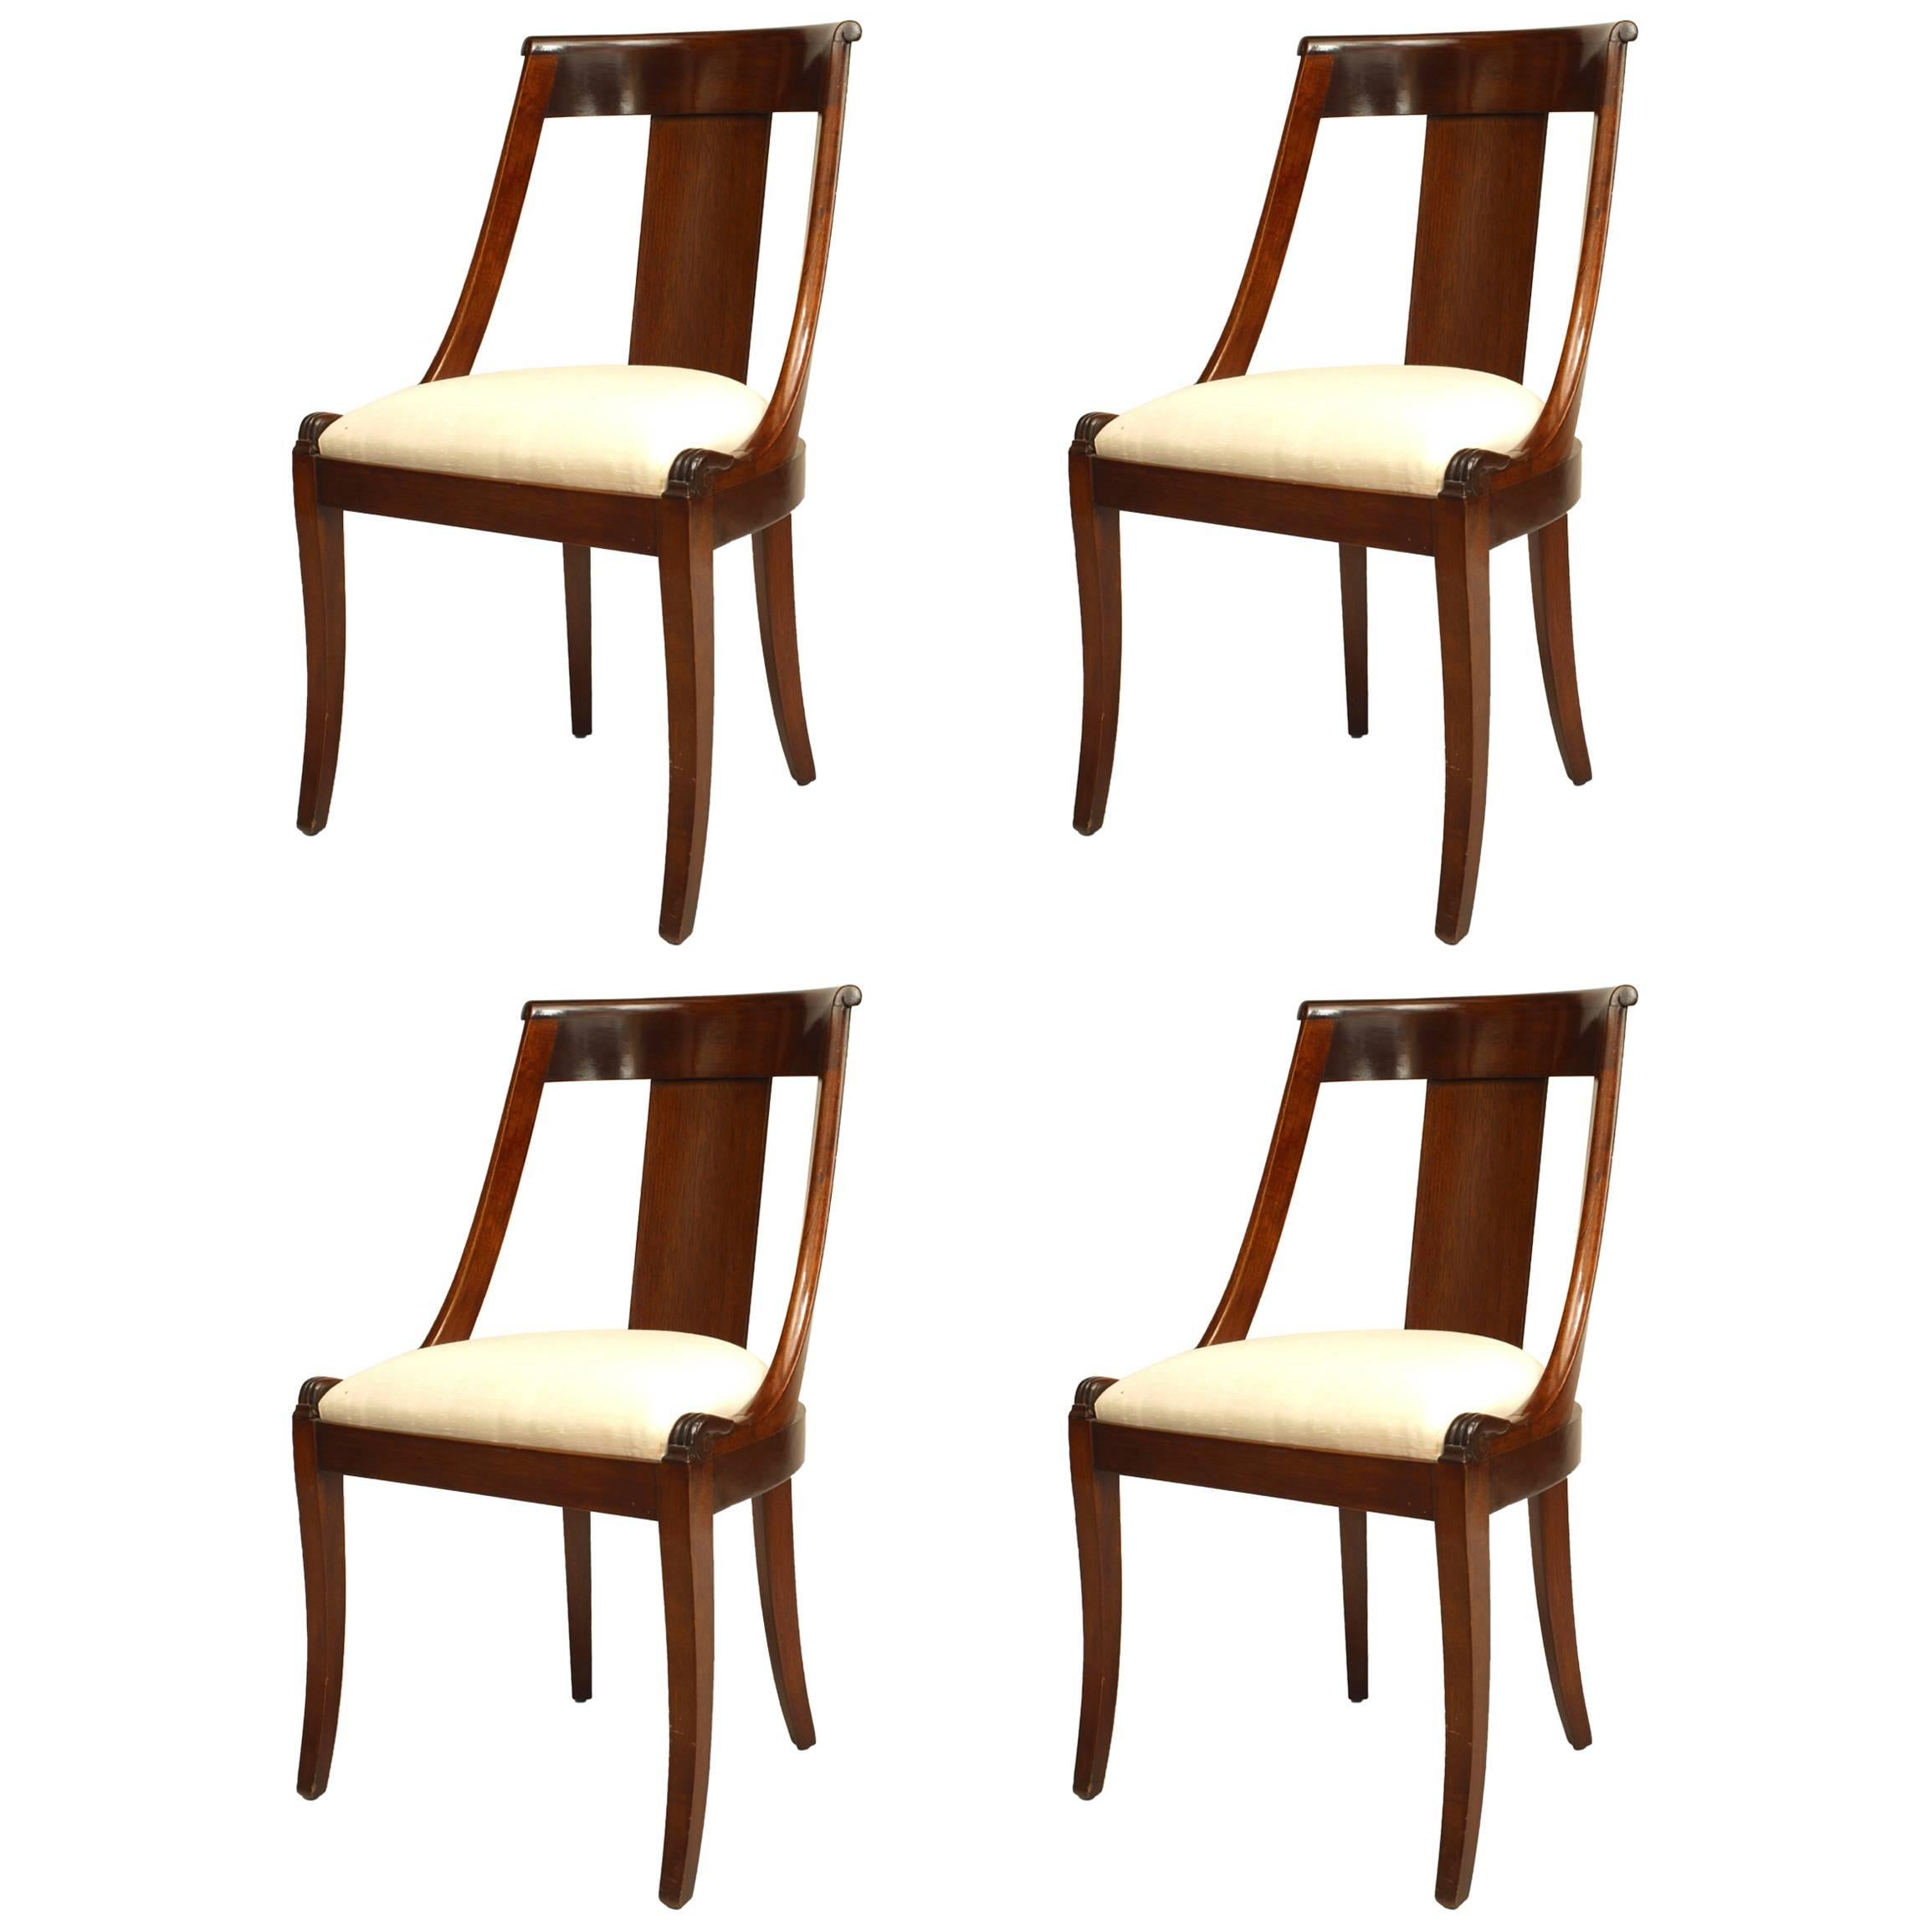 Set of Four French Empire Style '19th Century' Mahogany Sleigh Back Side Chairs